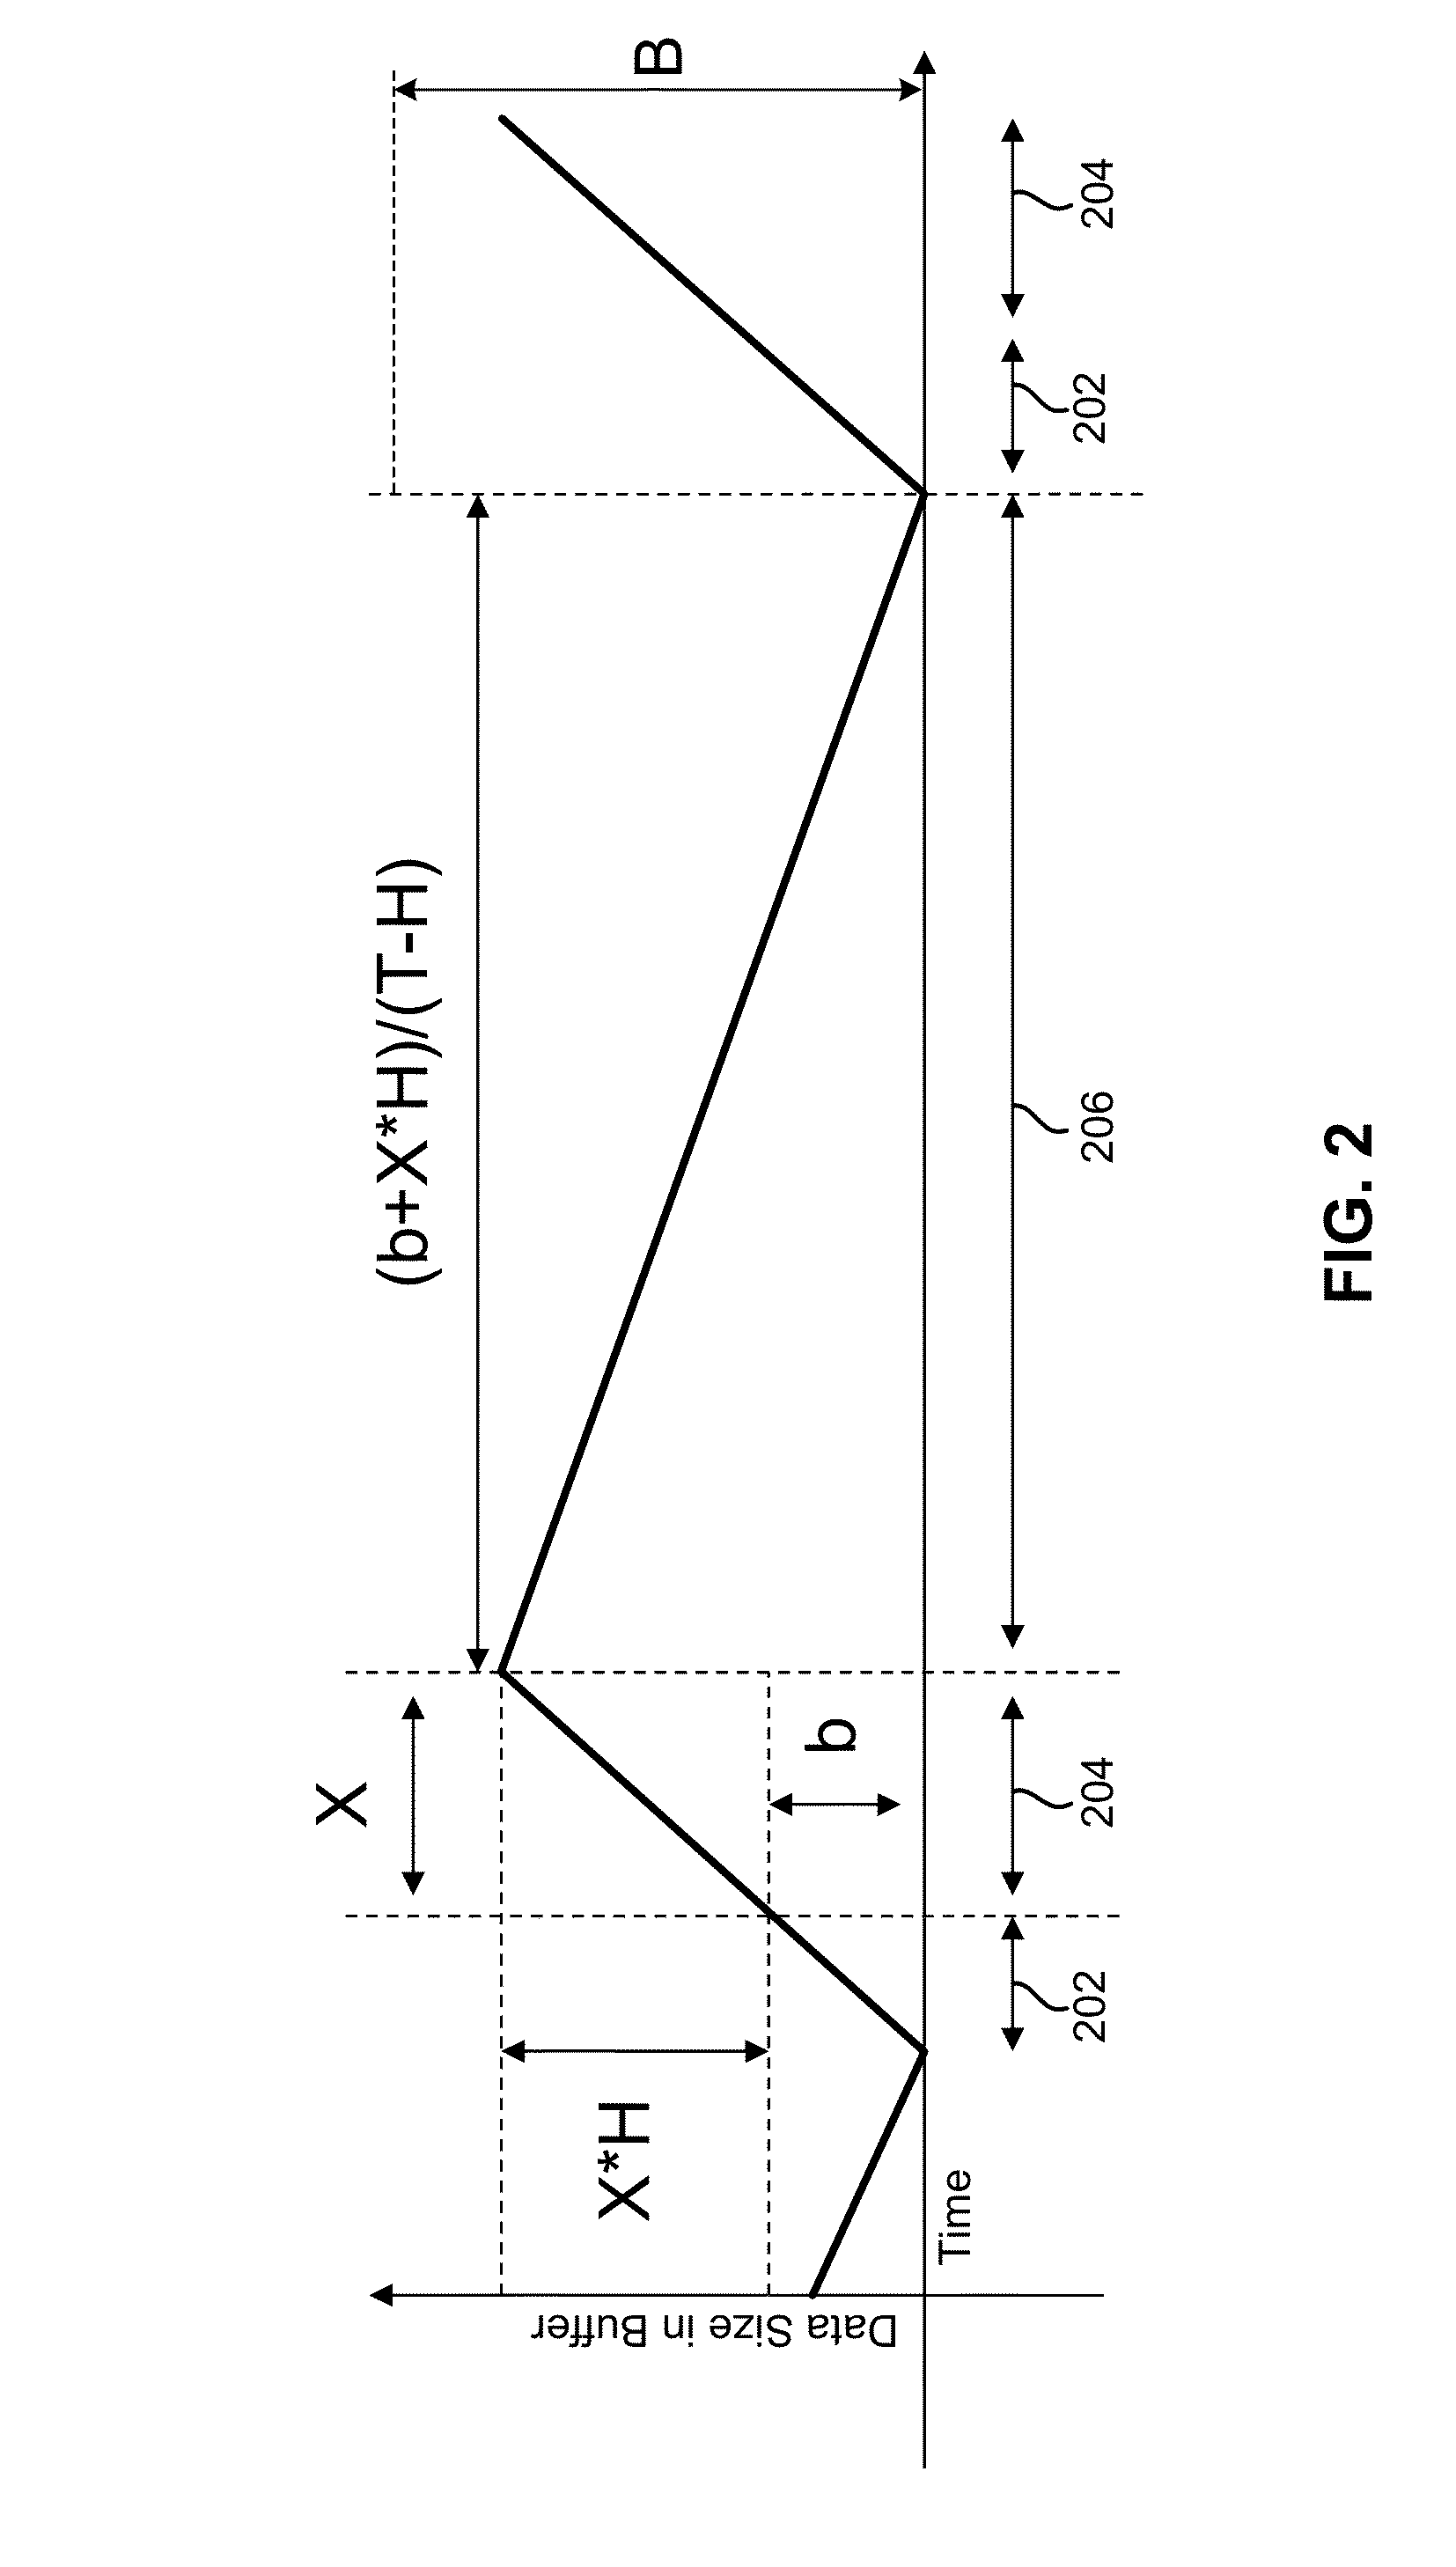 Dynamically changing a buffer flush threshold of a tape drive based on historical transaction size